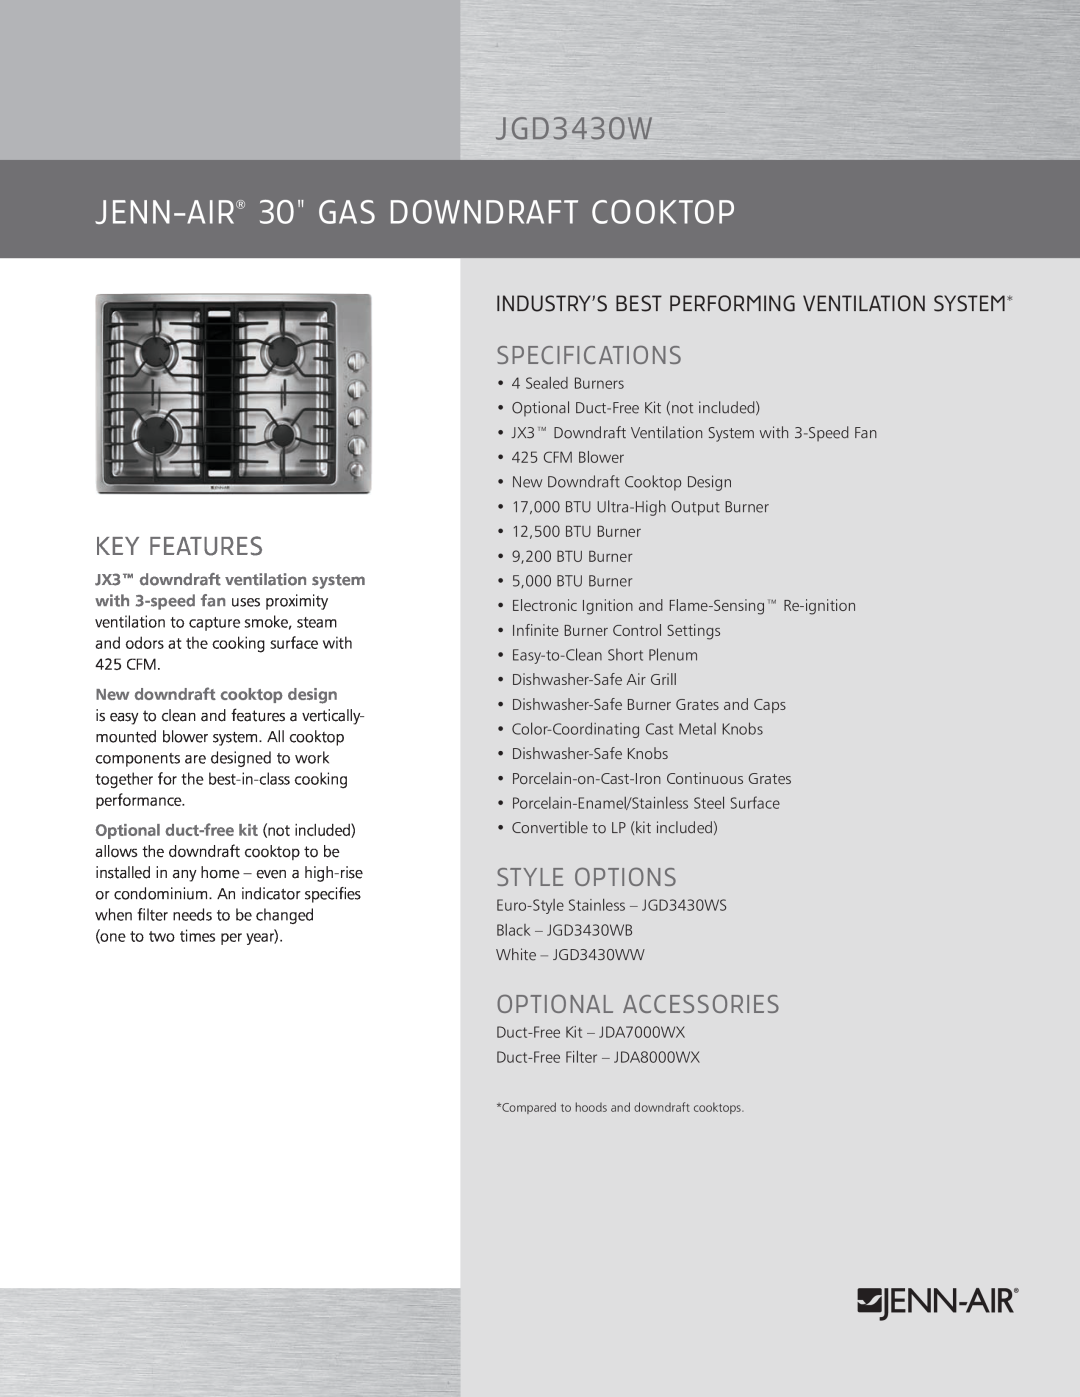 Jenn-Air JGD3430W specifications Jenn-Air 30 GAS DOWNDRAFT COOKTOP, key features, Style OPTIONS, Optional Accessories 